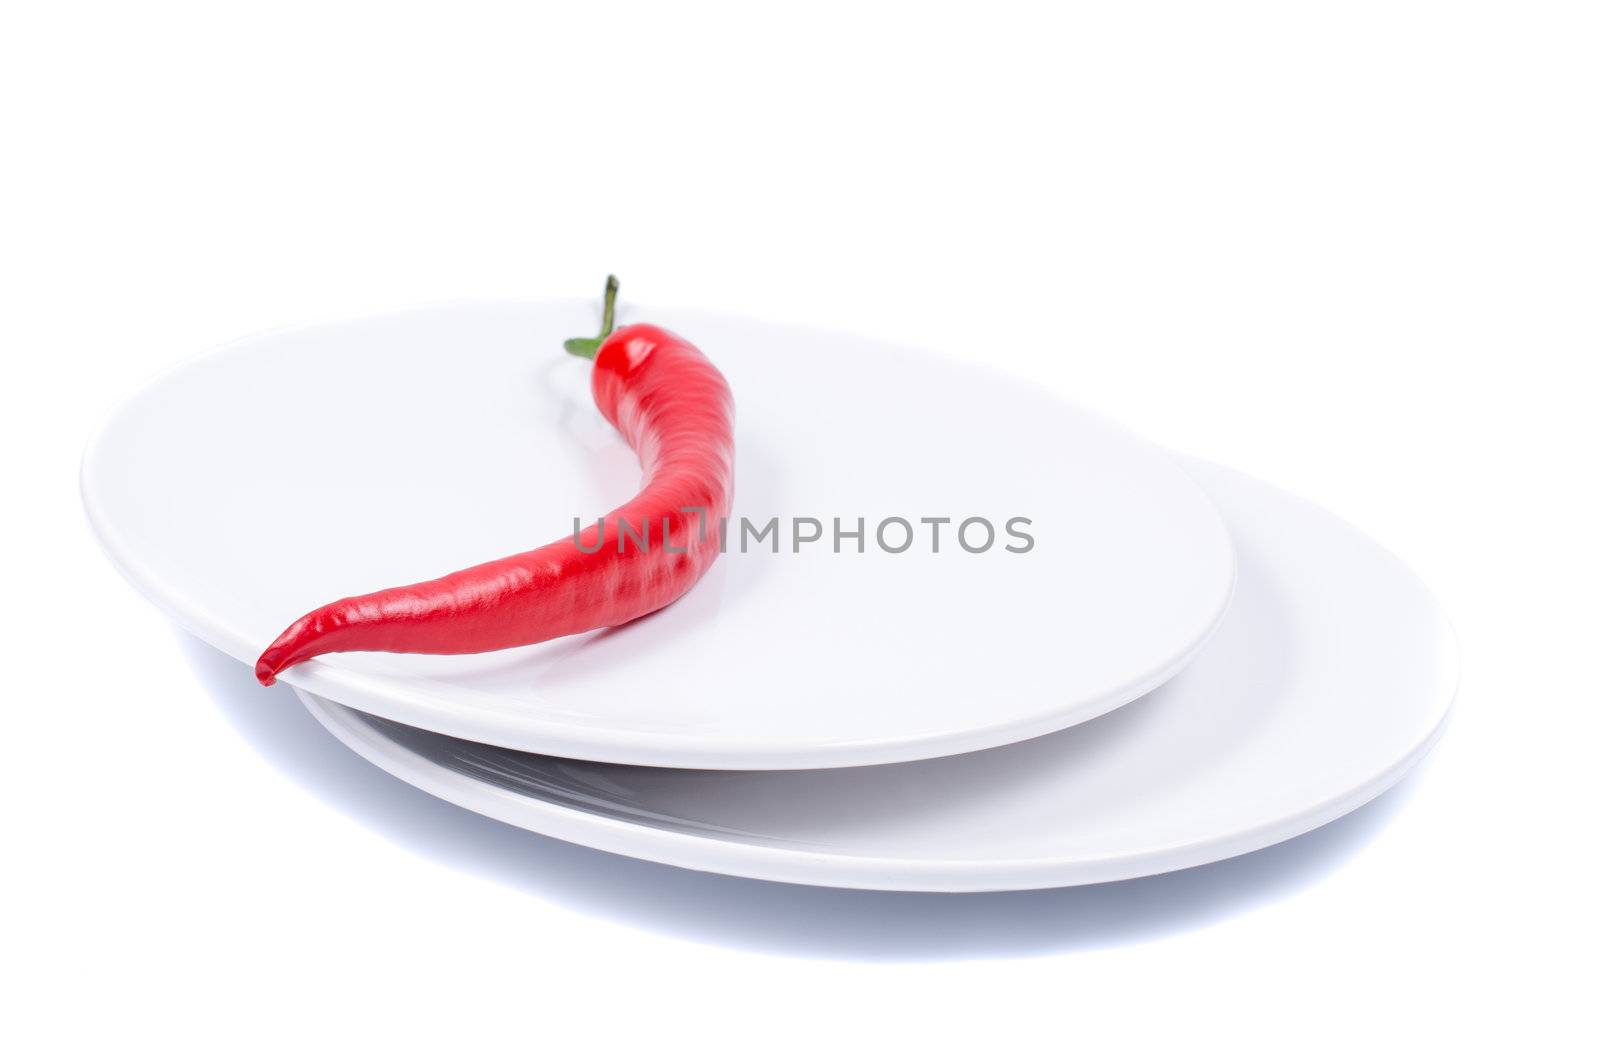 Red chili pepper on plate isolated close up